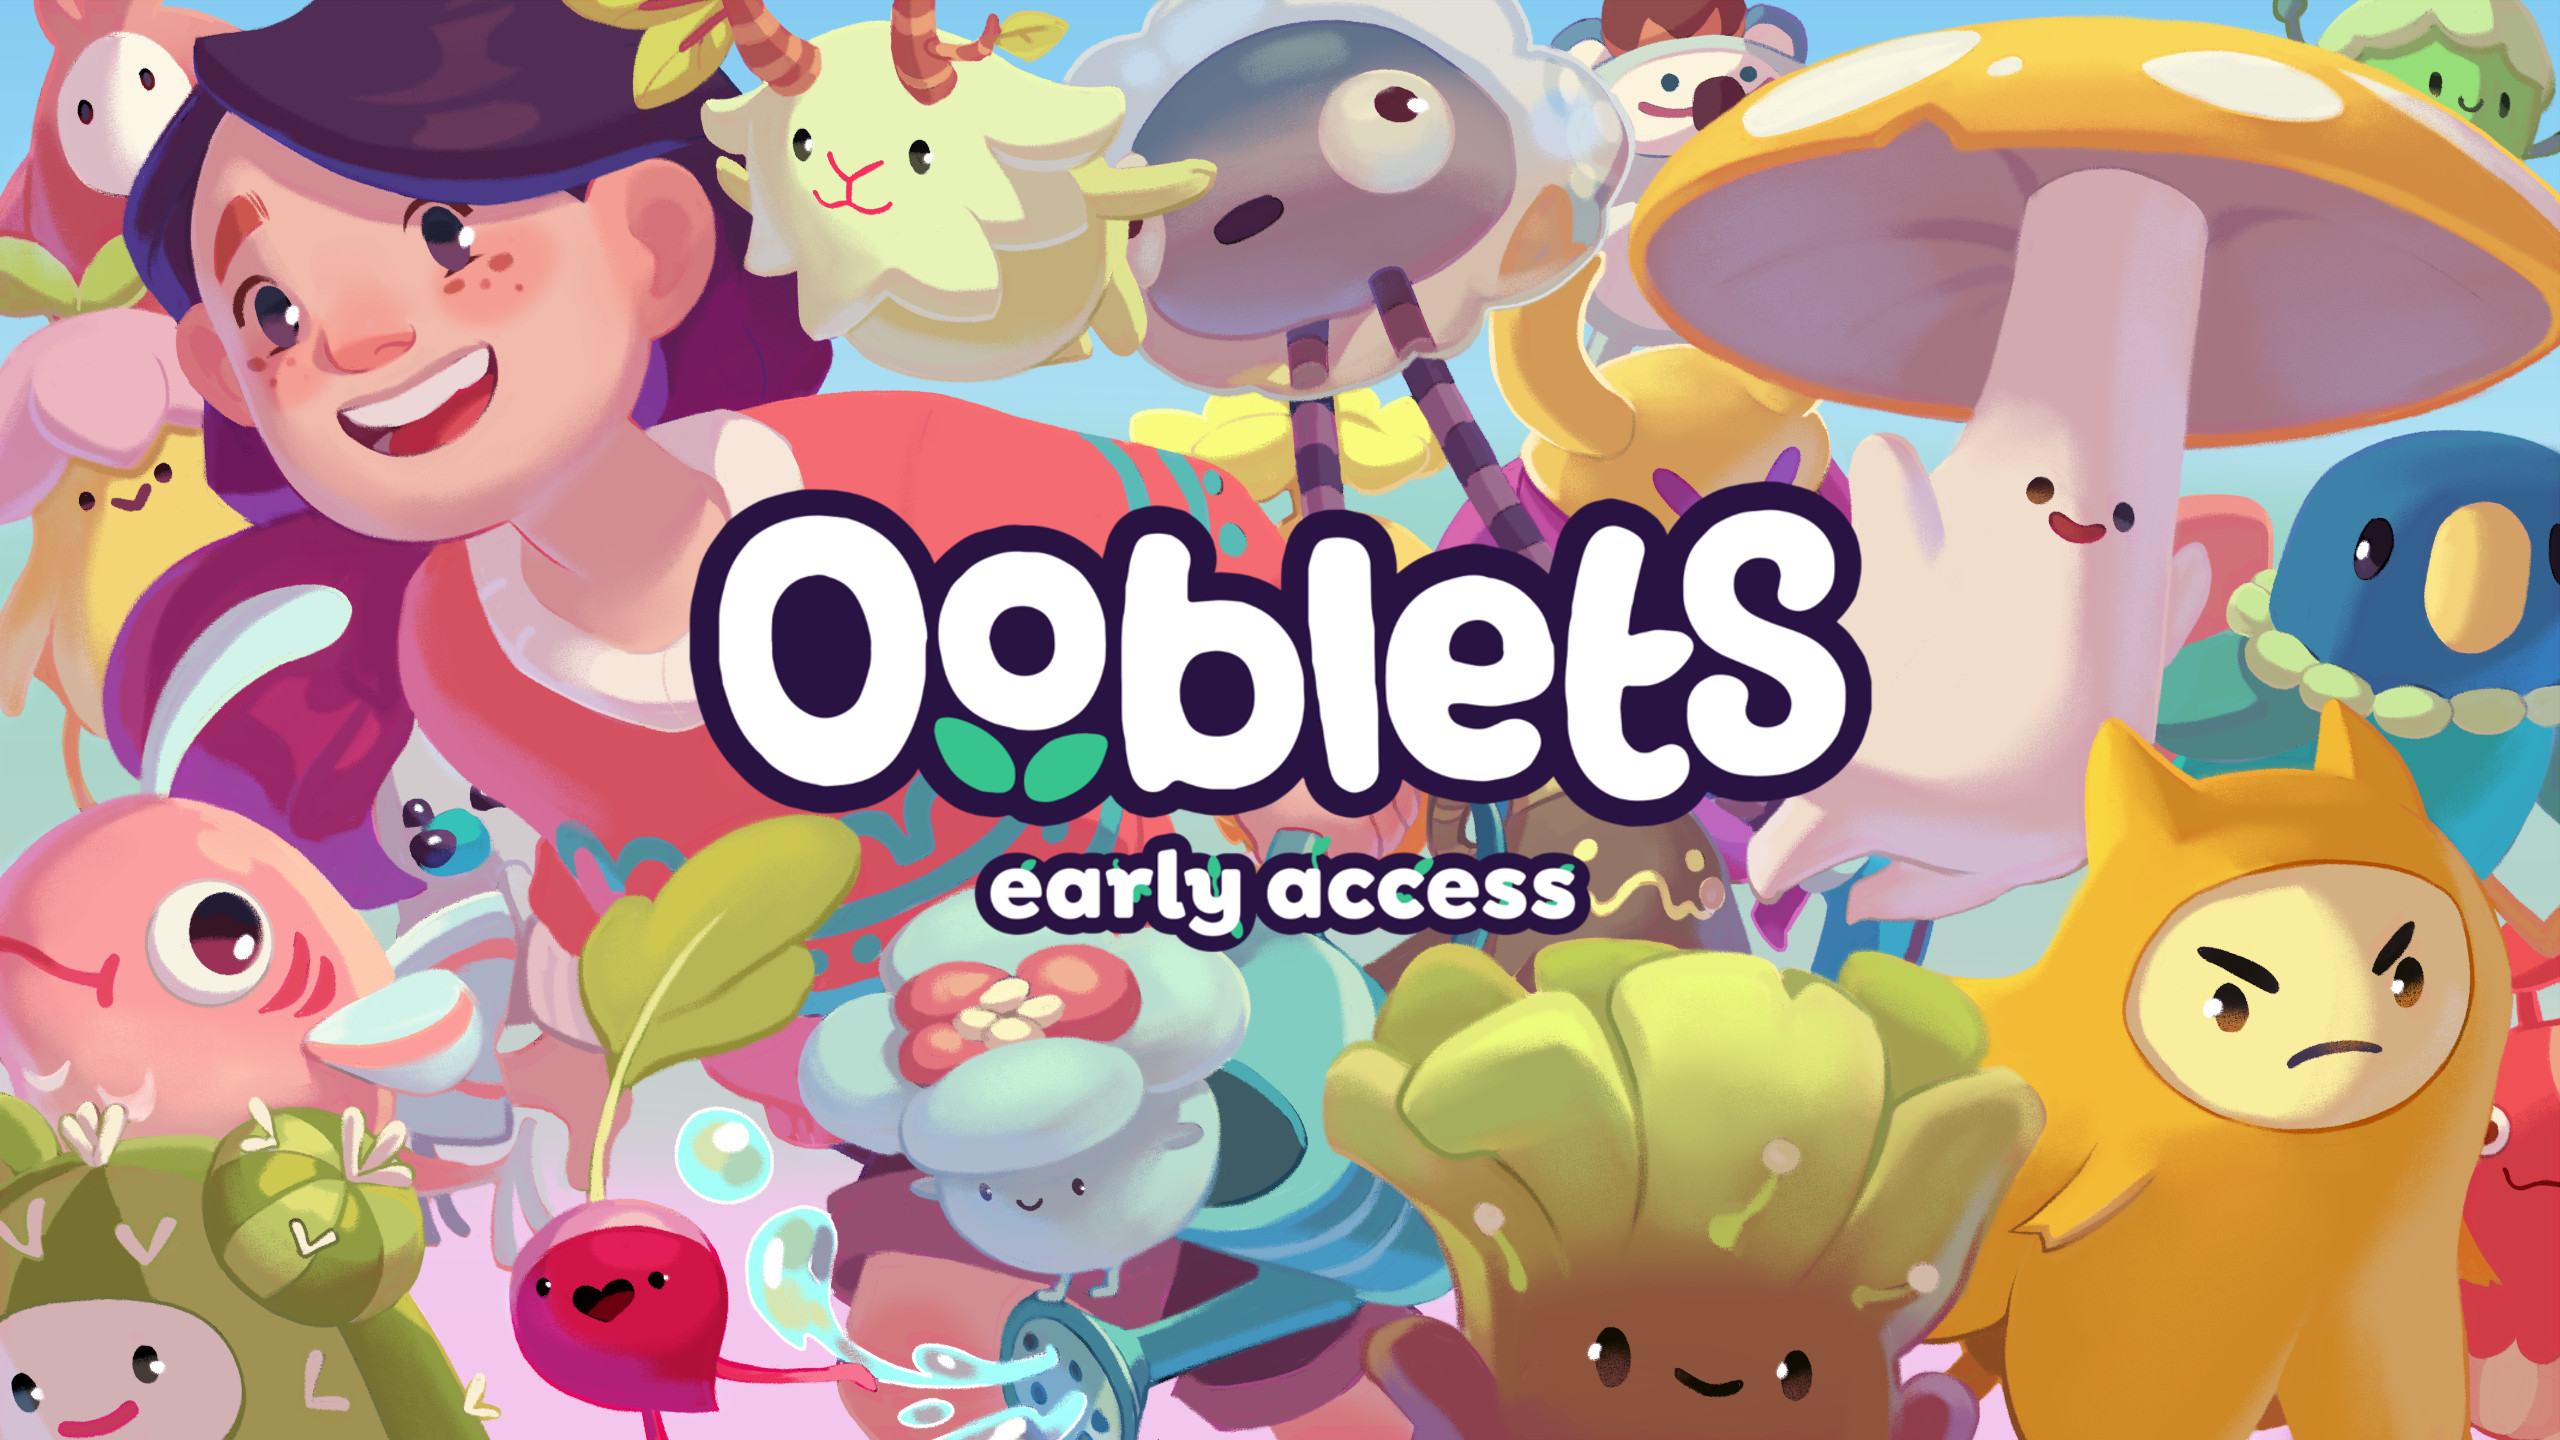 Ooblets is coming to Epic Games Store and Xbox Early Access “soon”